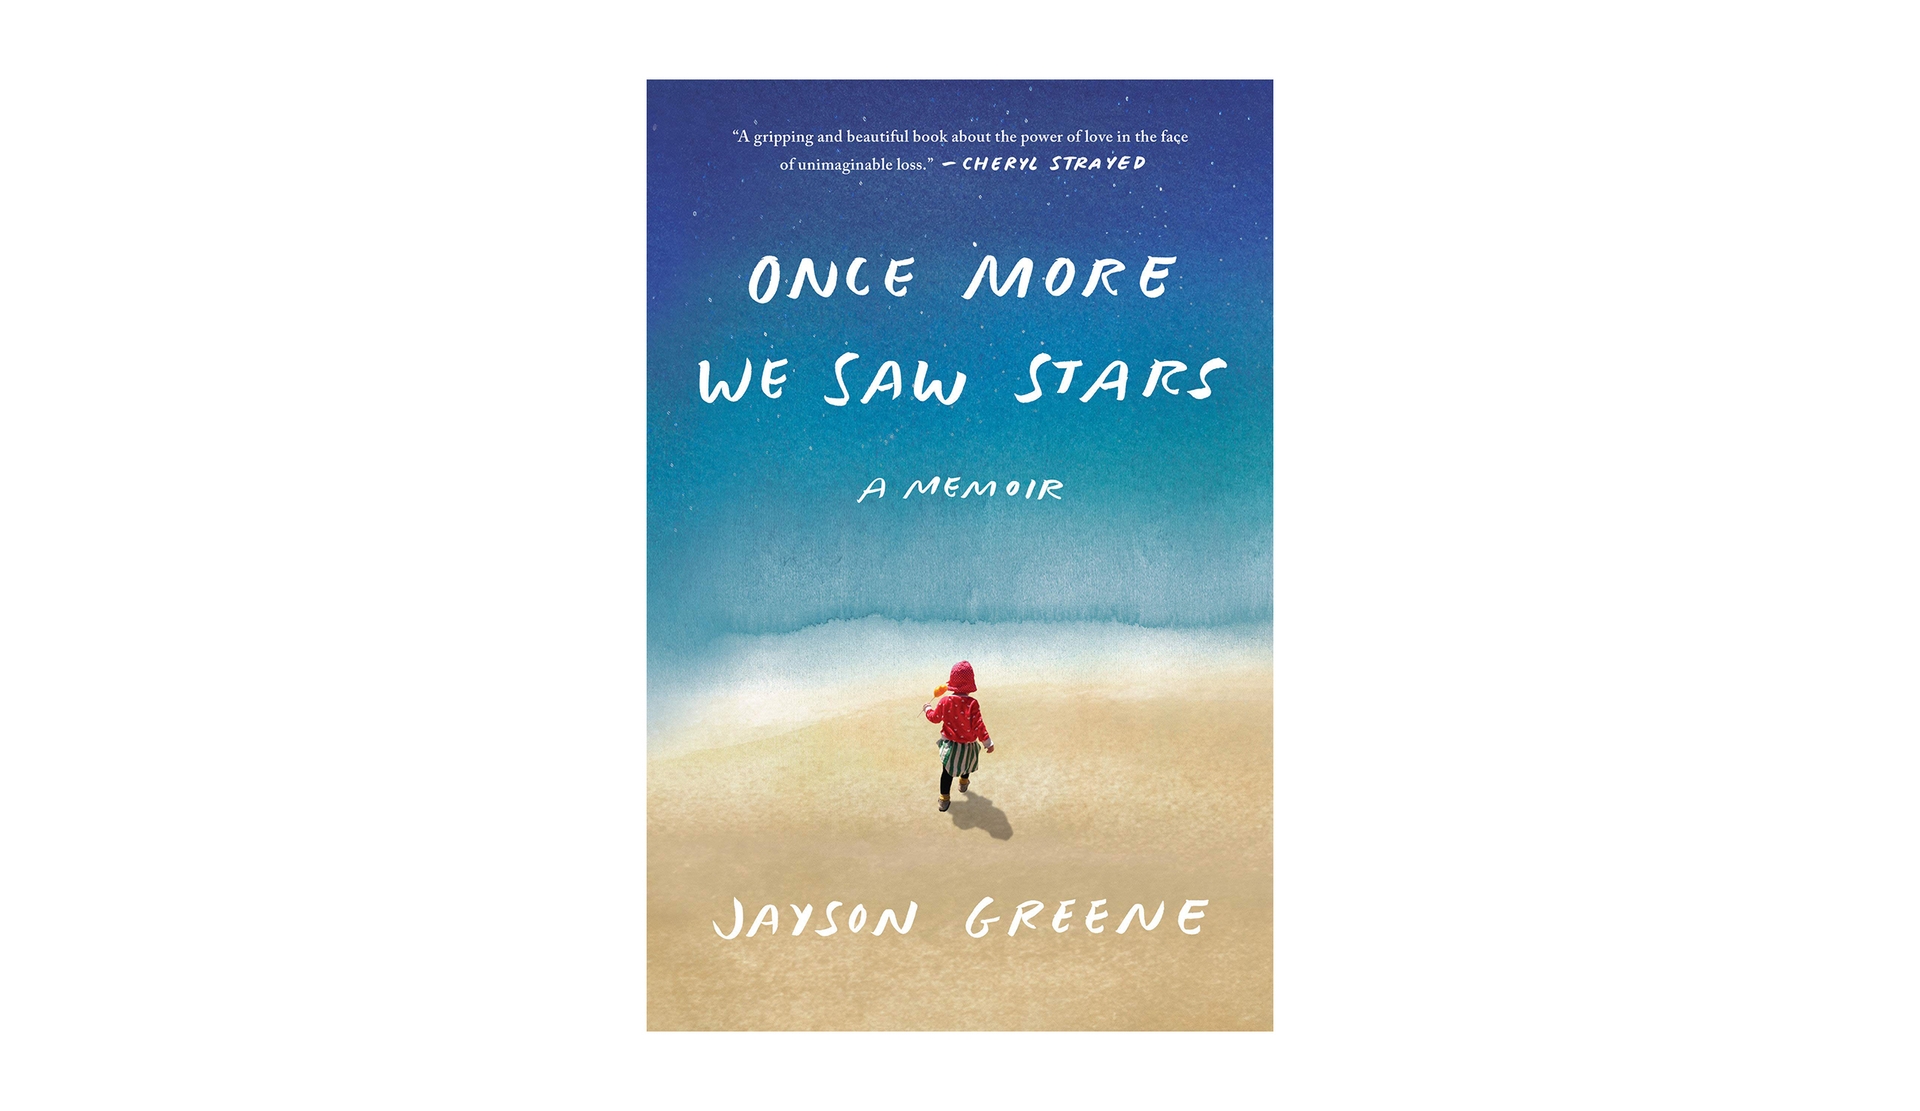 Book cover of "Once more we saw stars" - a memoir by Jayson Green. The title and author name are scrawled in white, all caps, handwritten font. The background shows a stylized image that ppears to be a child running on a surface that may be the beach, toward what appears to be a body of water that bleeds into a darker blue like the night sky, speckled with stars.